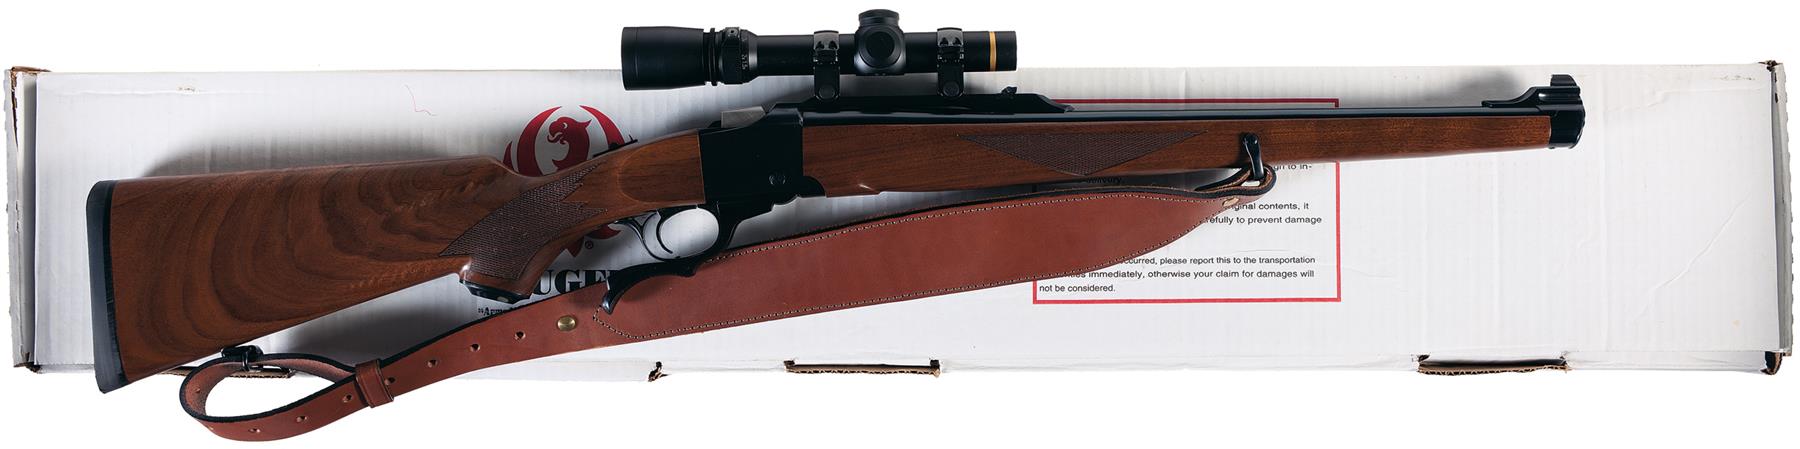 ruger rifle serial numbers